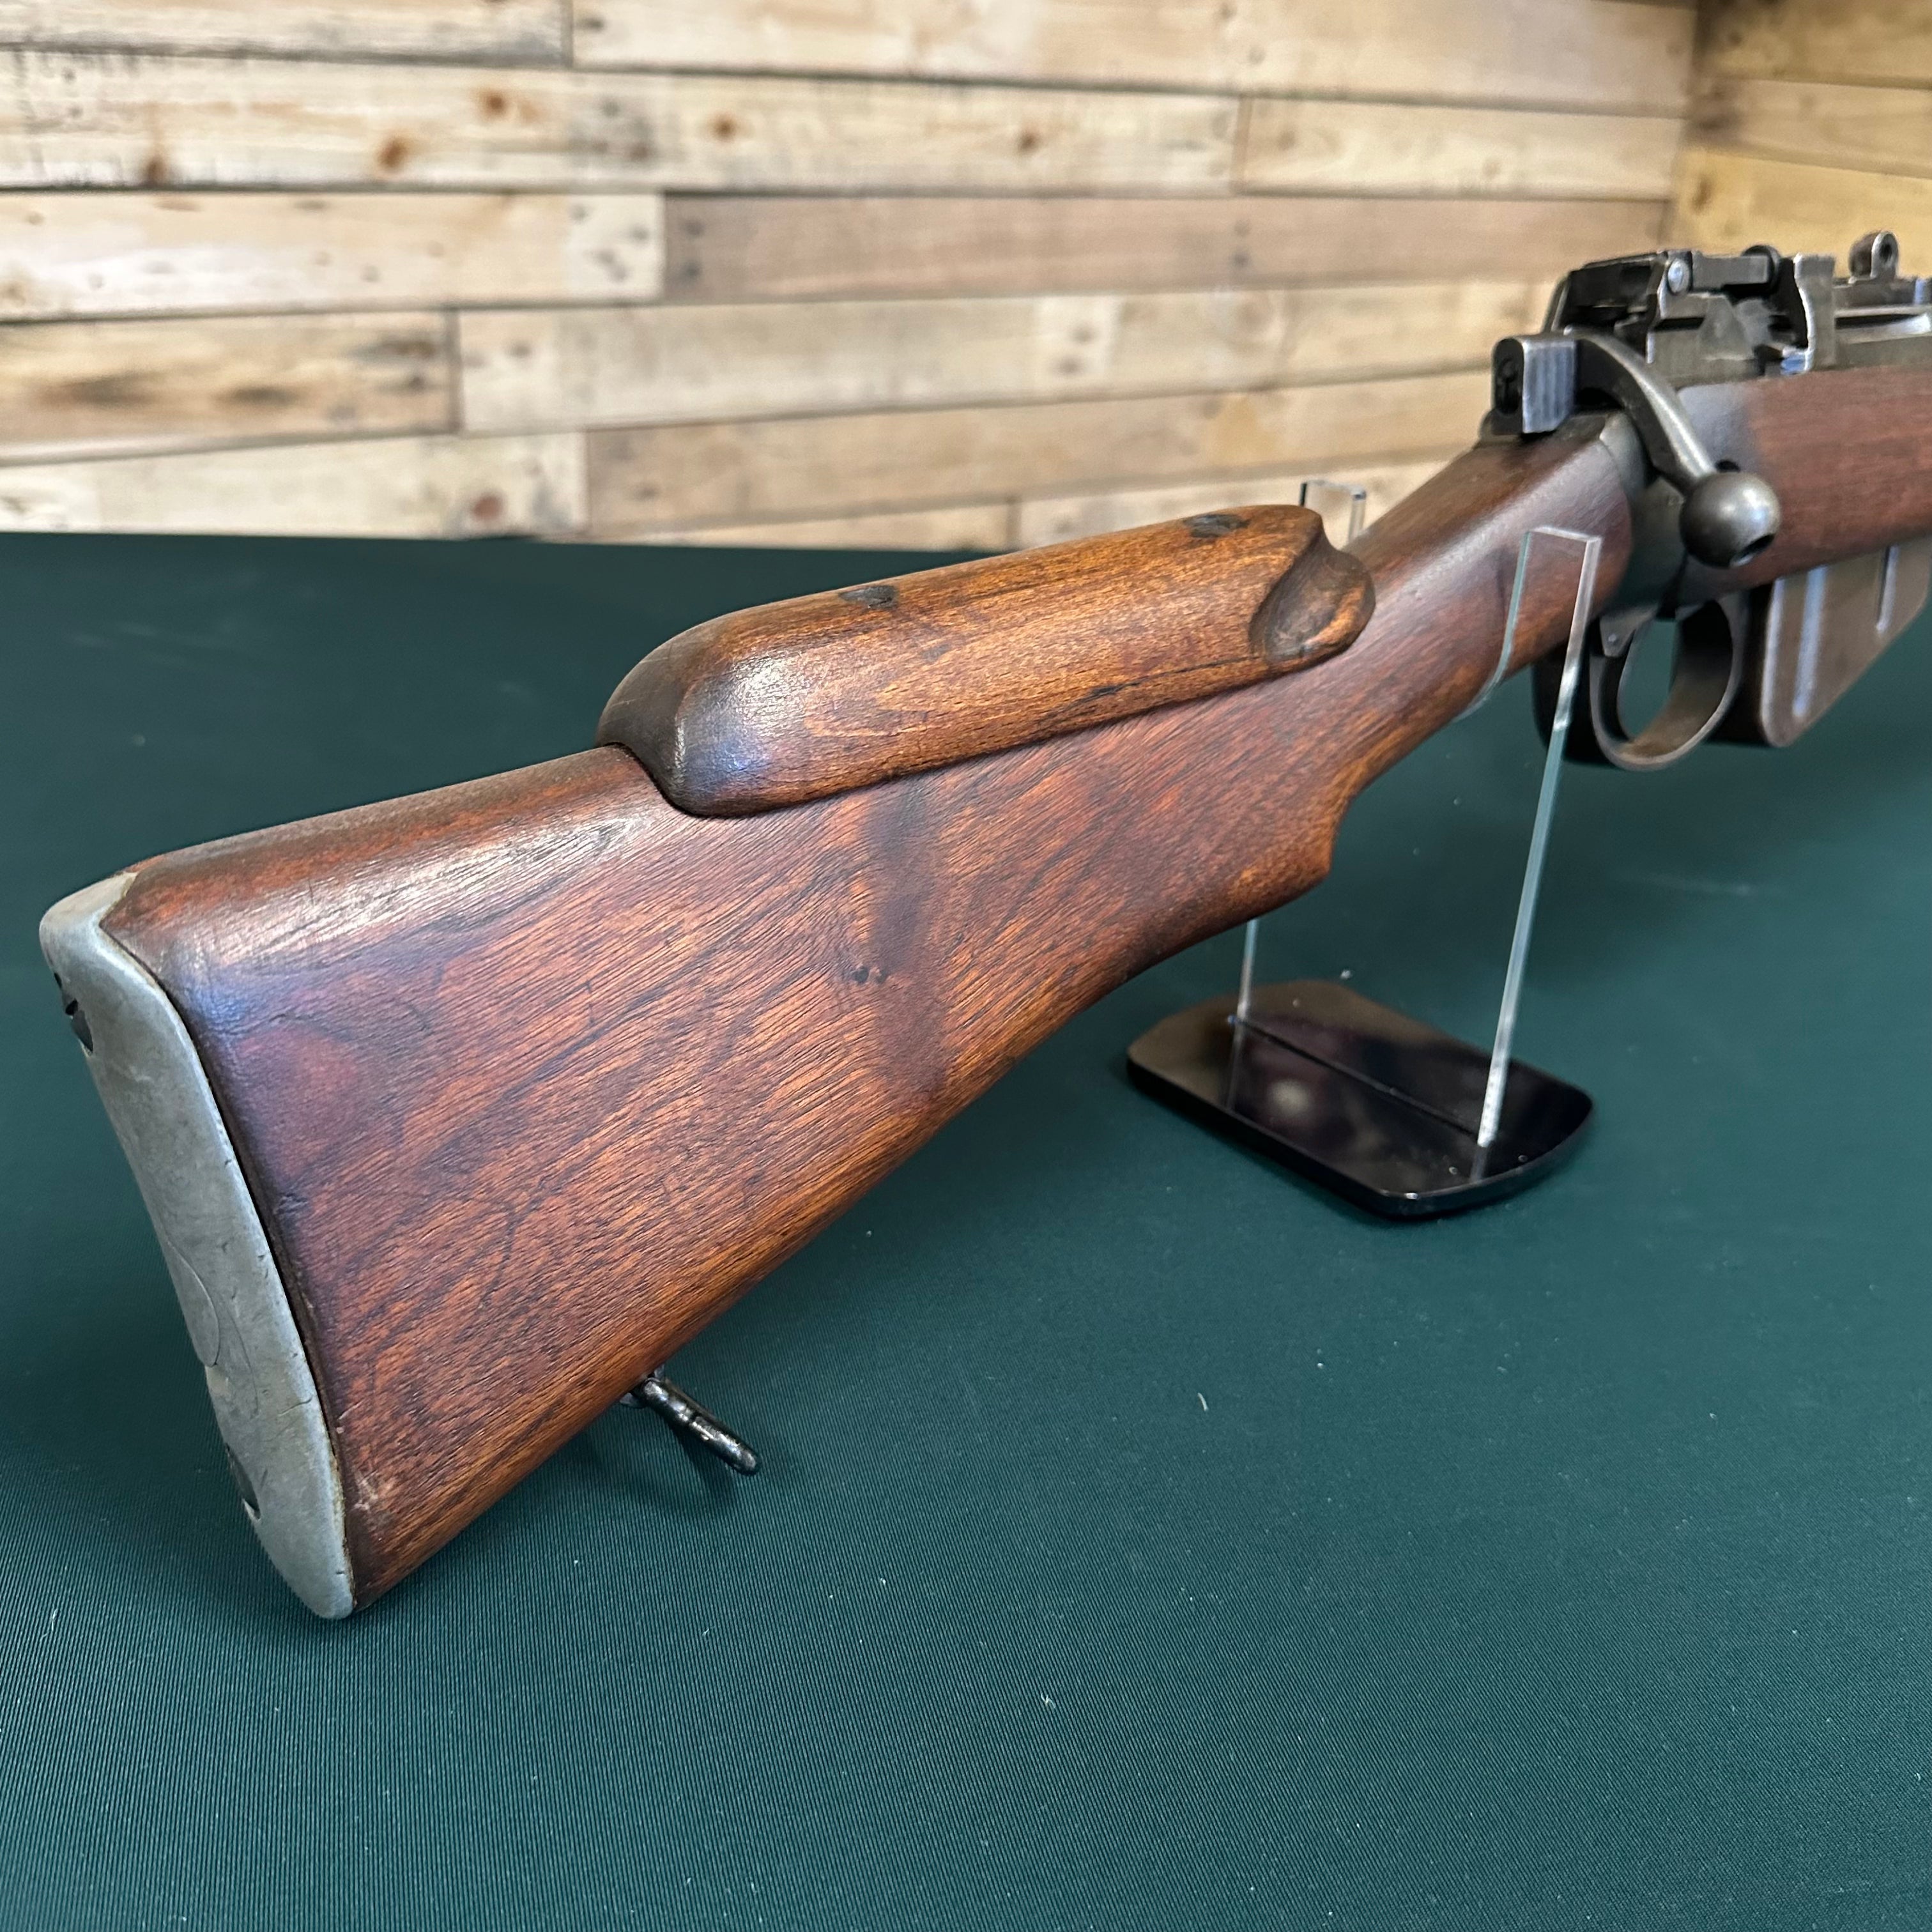 1944 BSA Lee Enfield No.4 Mk1T Sniper Rifle with a No.32 MkII scope - SOLD